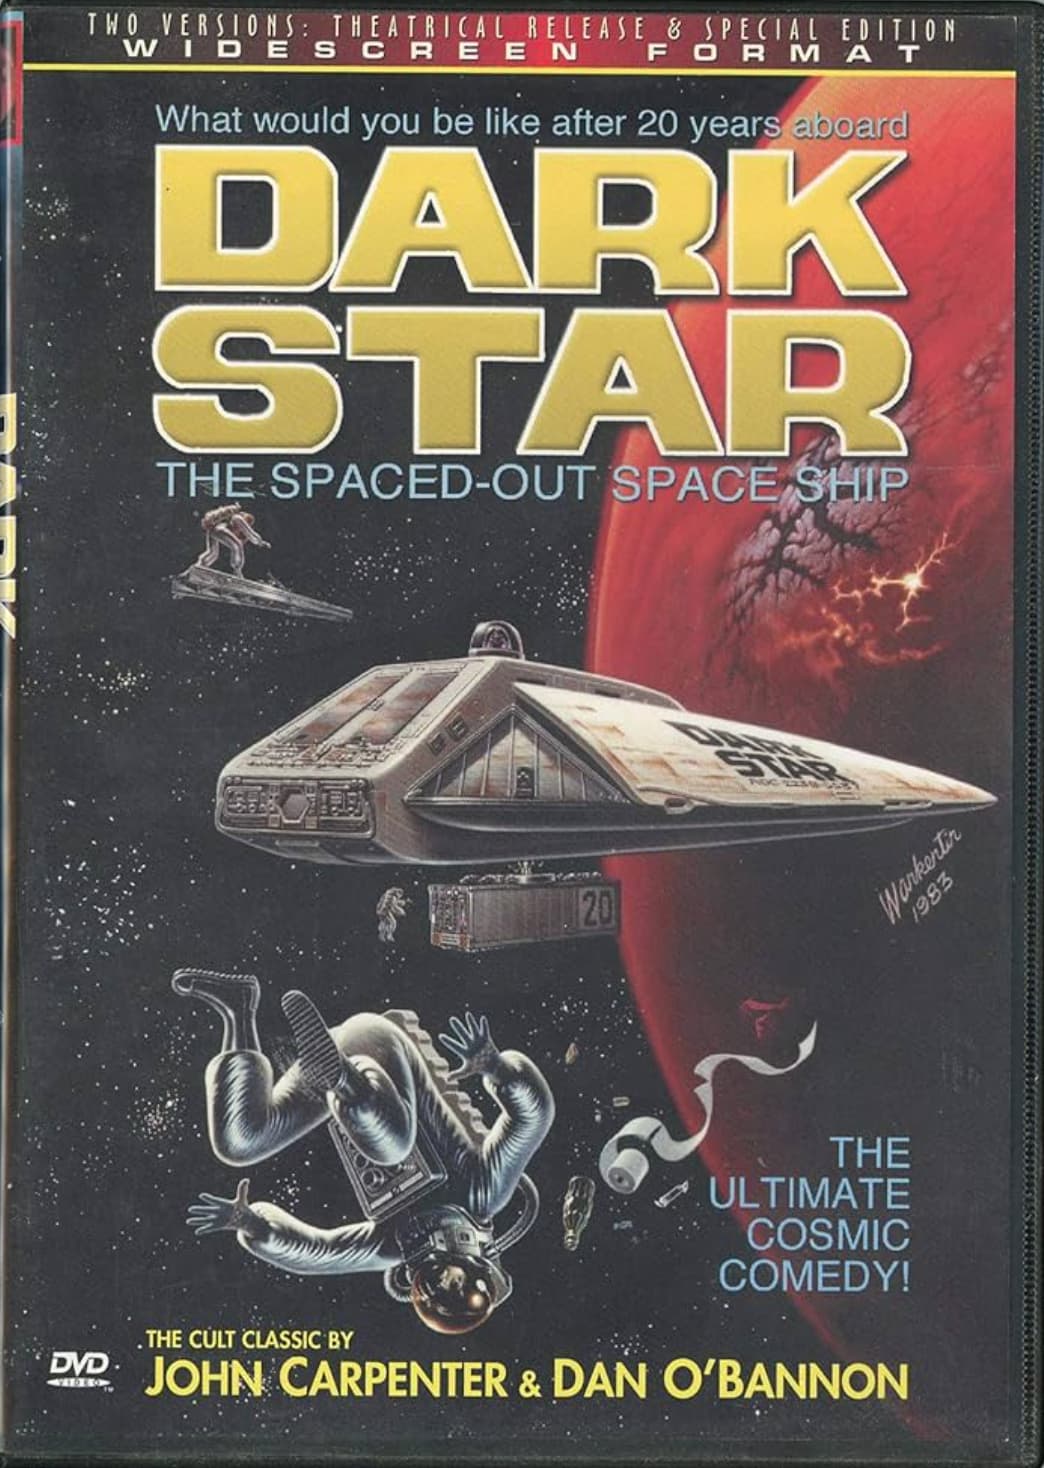 dark star movie - Two Versions Theatrical Release & Special Edition Format Widescreen What would you be after 20 years aboard Dark Star The SpacedOut Space Ship 20 Star The Ultimate Cosmic Comedy! .The Cult Classic By Dvd John Carpenter & Dan O'Bannon War